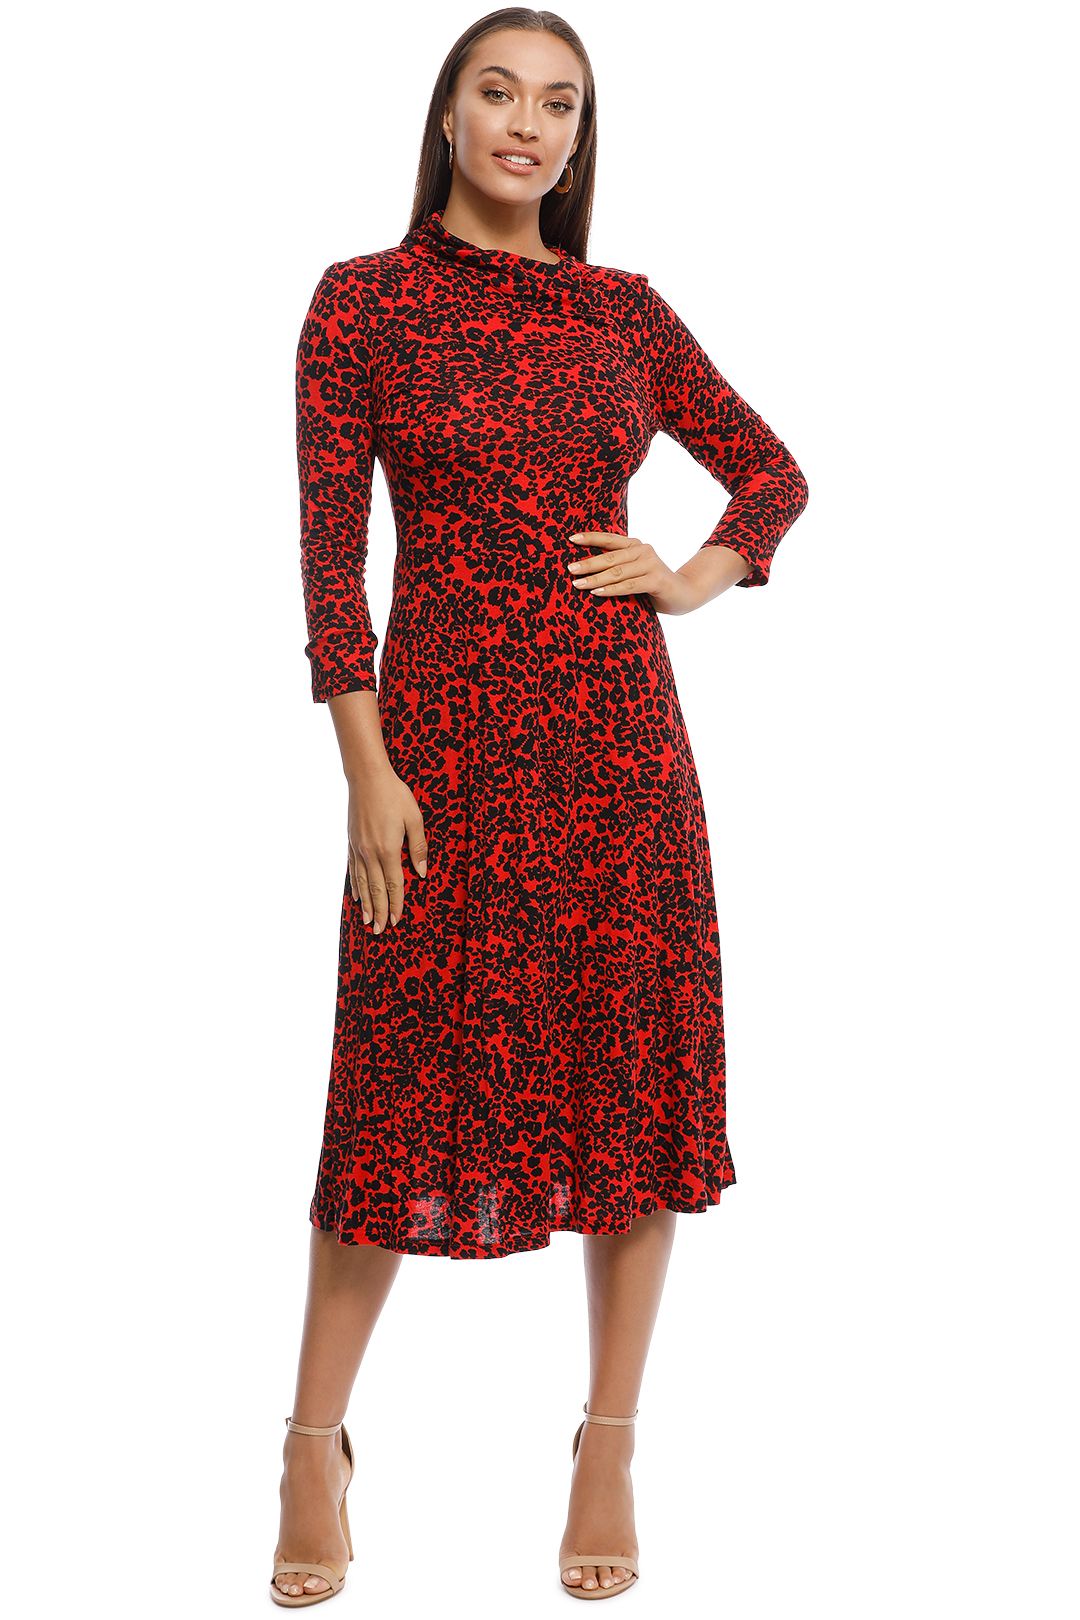 MNG - Moncho Animal Print Dress - Red - Front